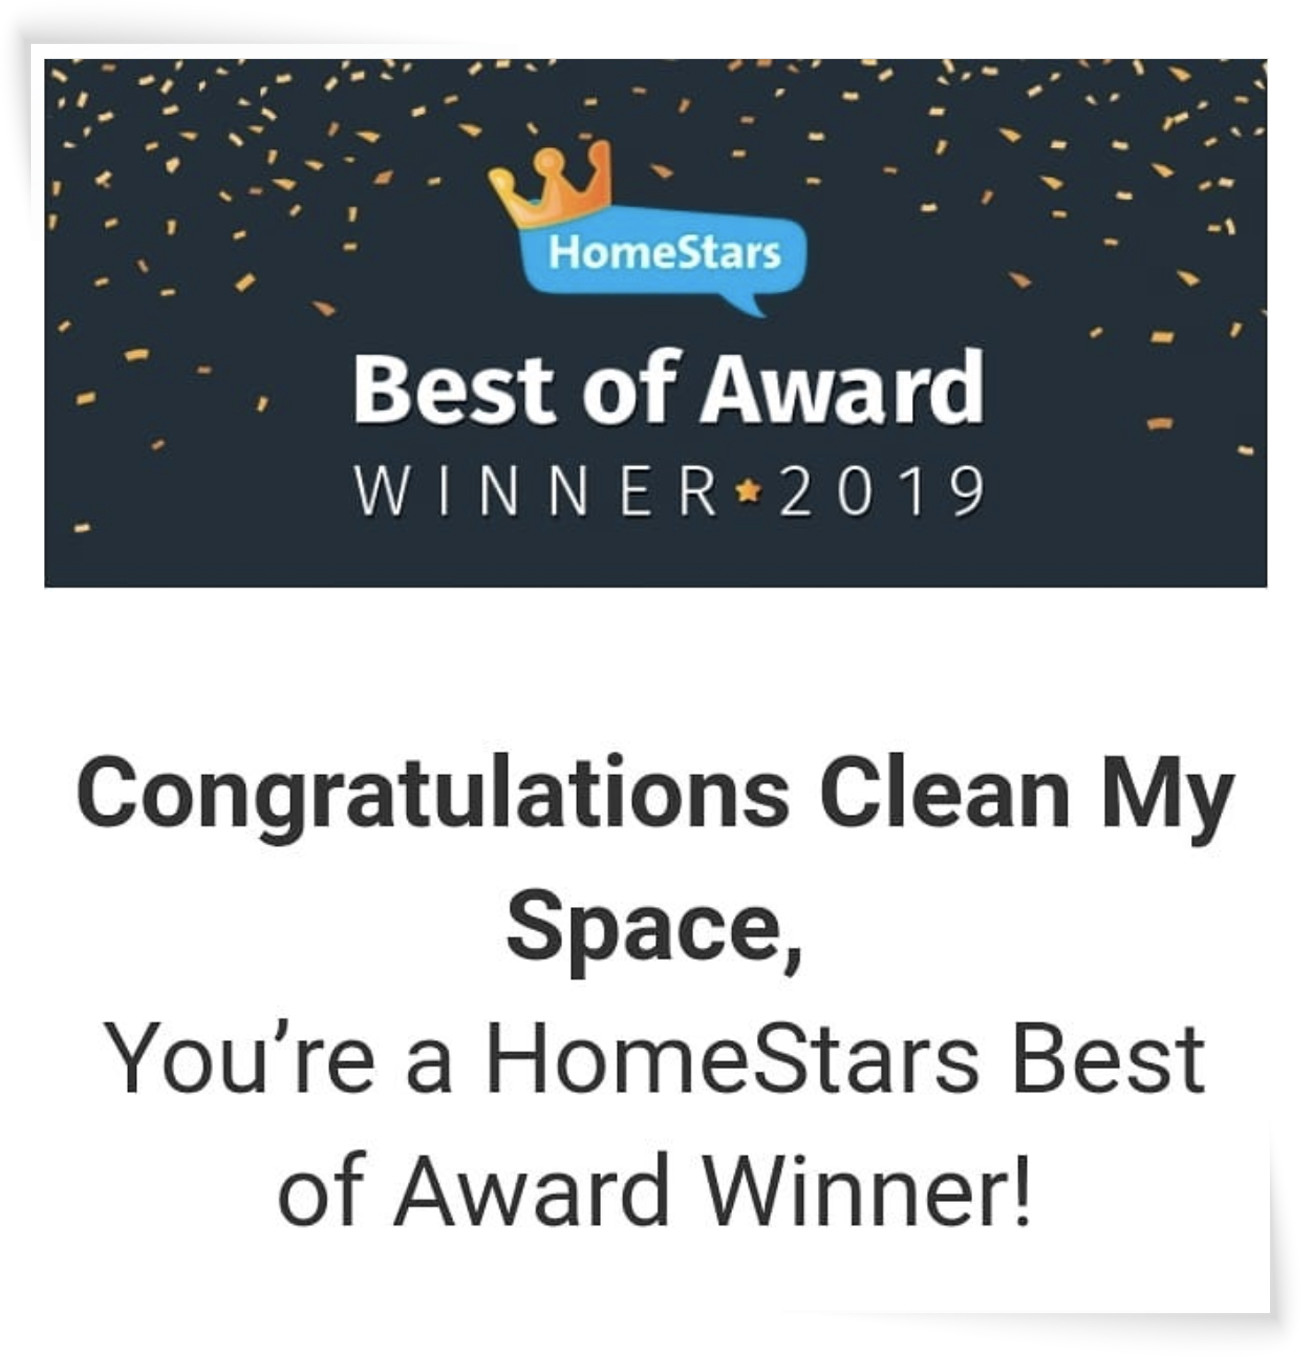 We recently won the HomeStars “Best Of” Award for the second time